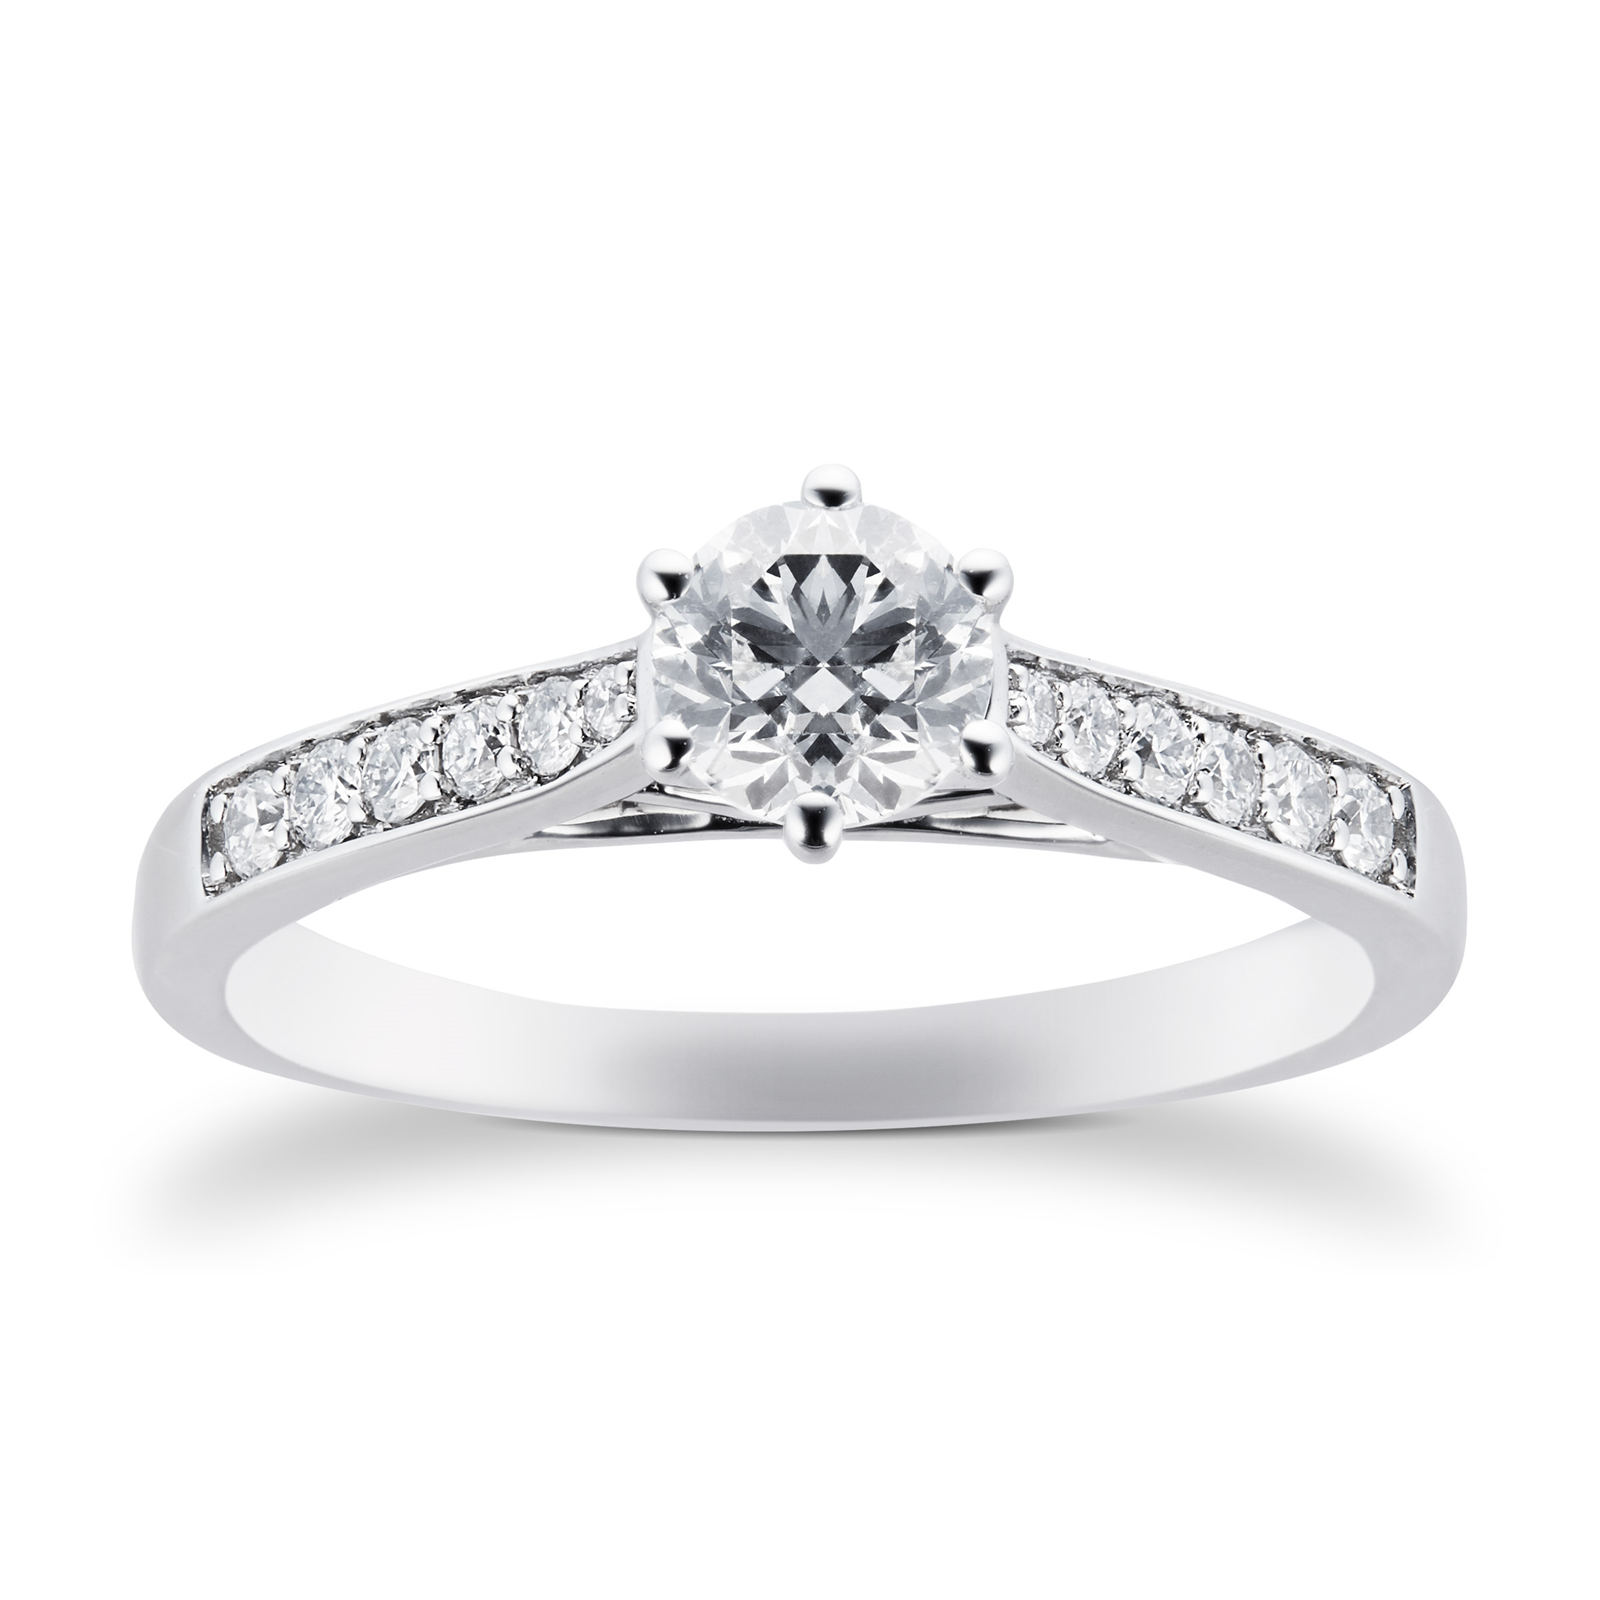 0.65 Carat Diamond Price Online Hotsell, UP TO 52% OFF | www.mcep.es